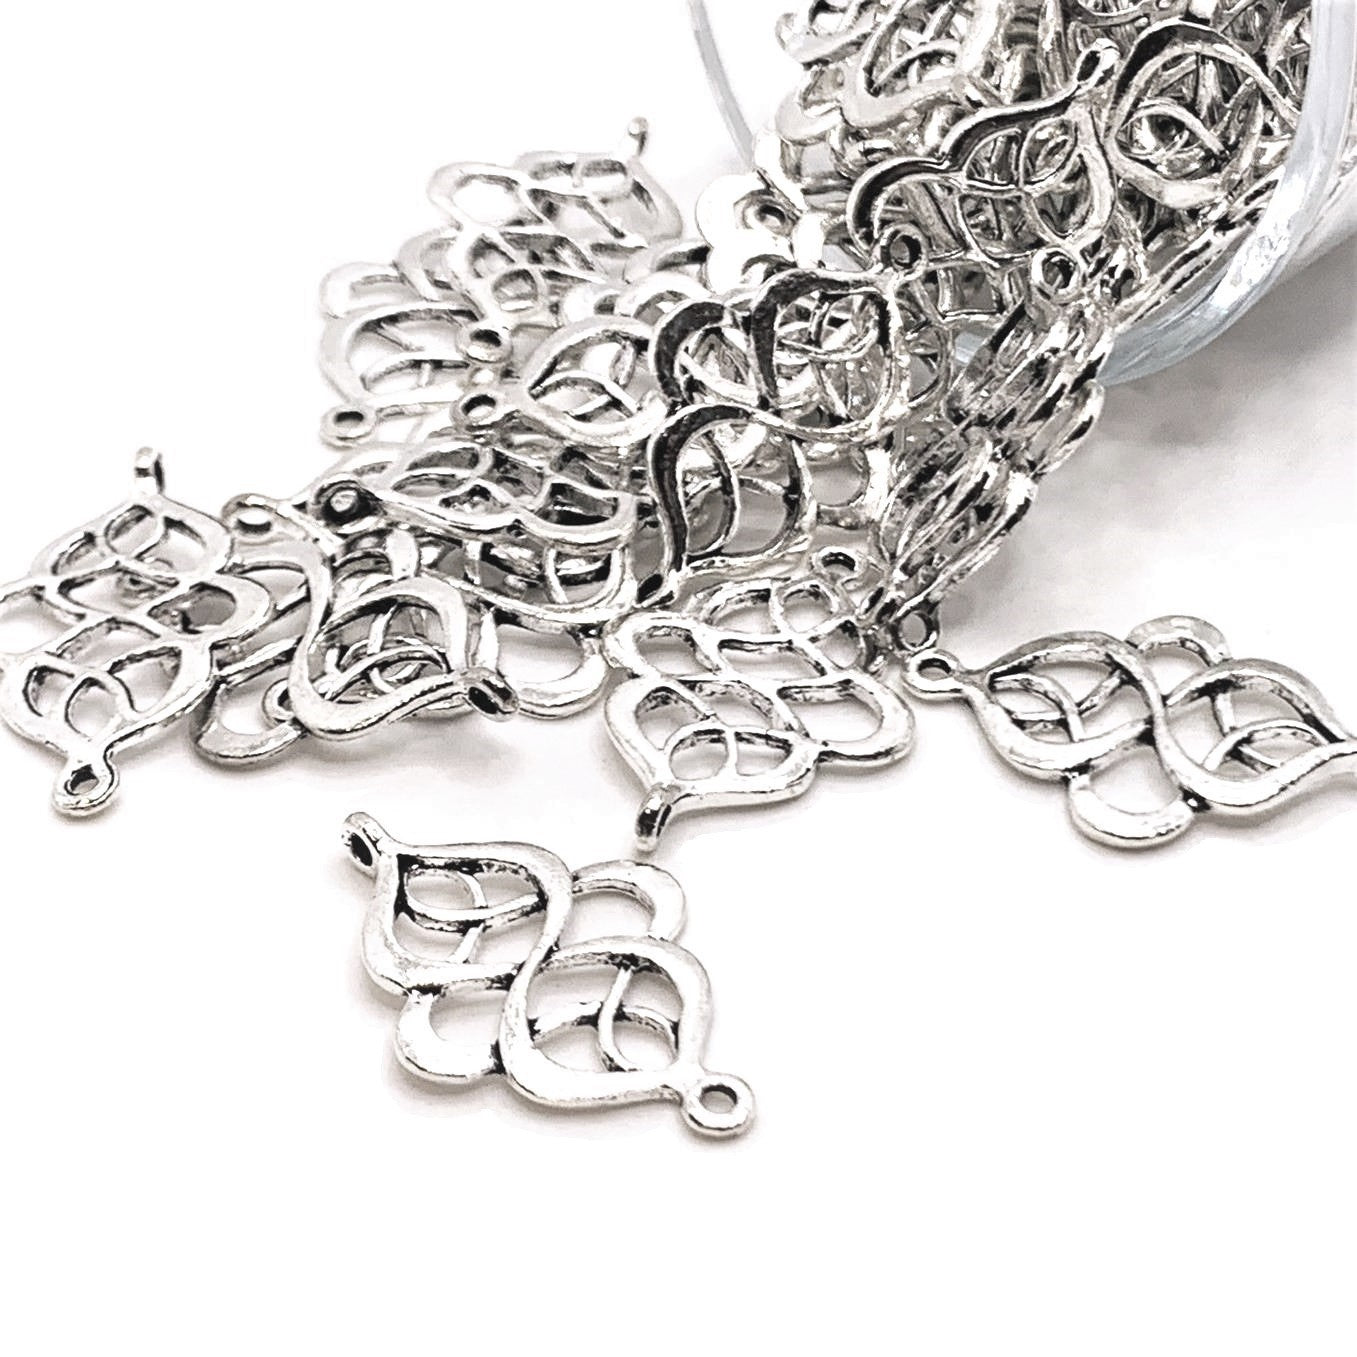 4, 20 or 50 Pieces: Silver Chinese Knot Connector Charms